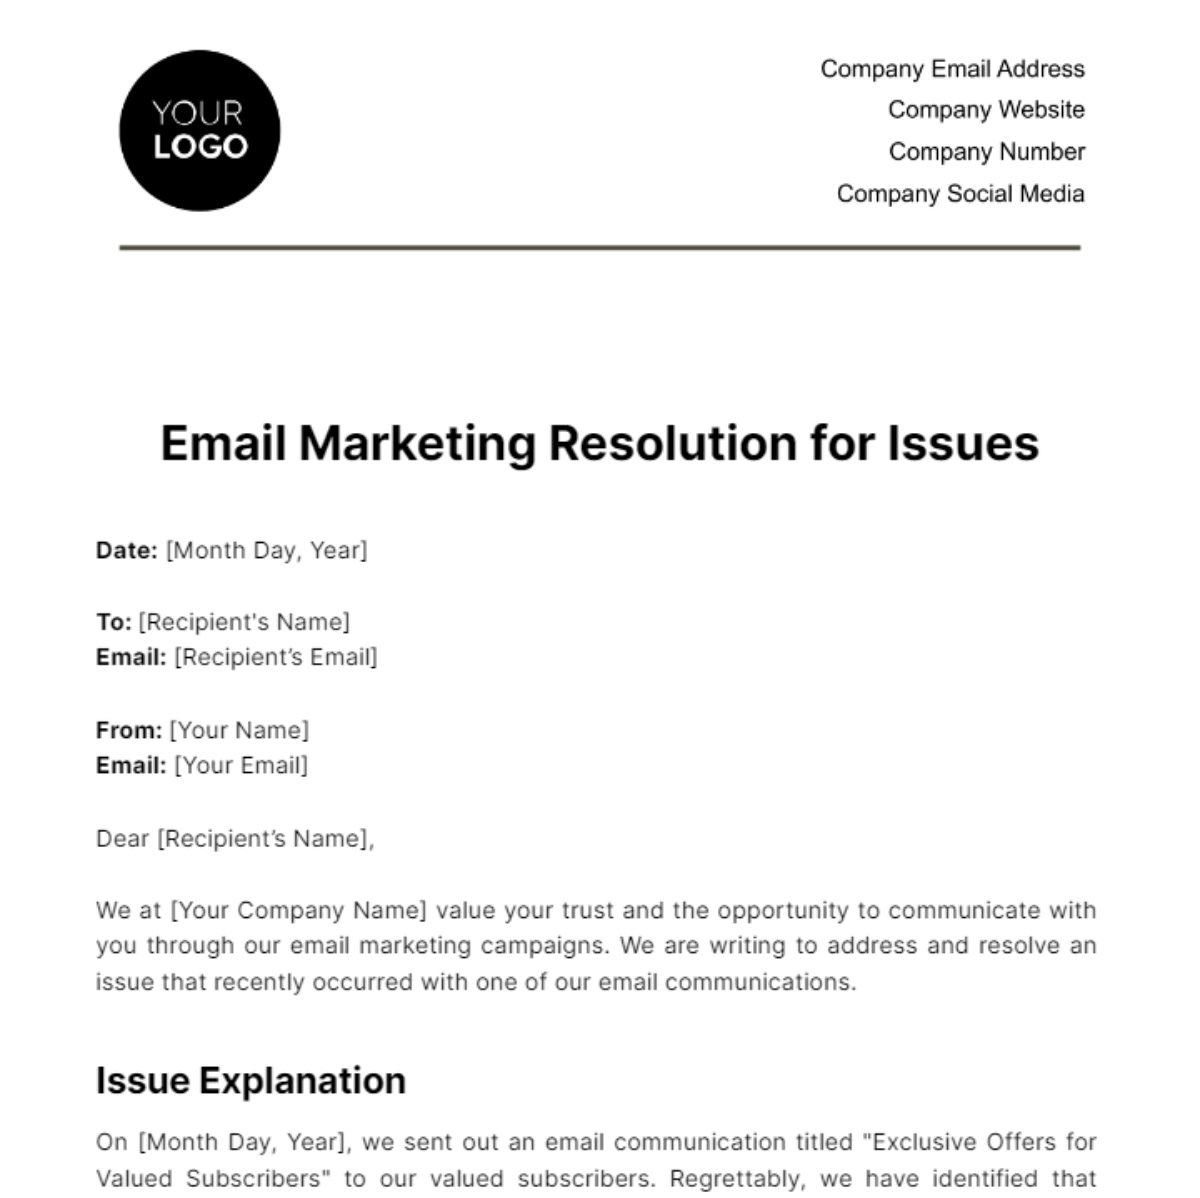 Free Email Marketing Resolution for Issues Template